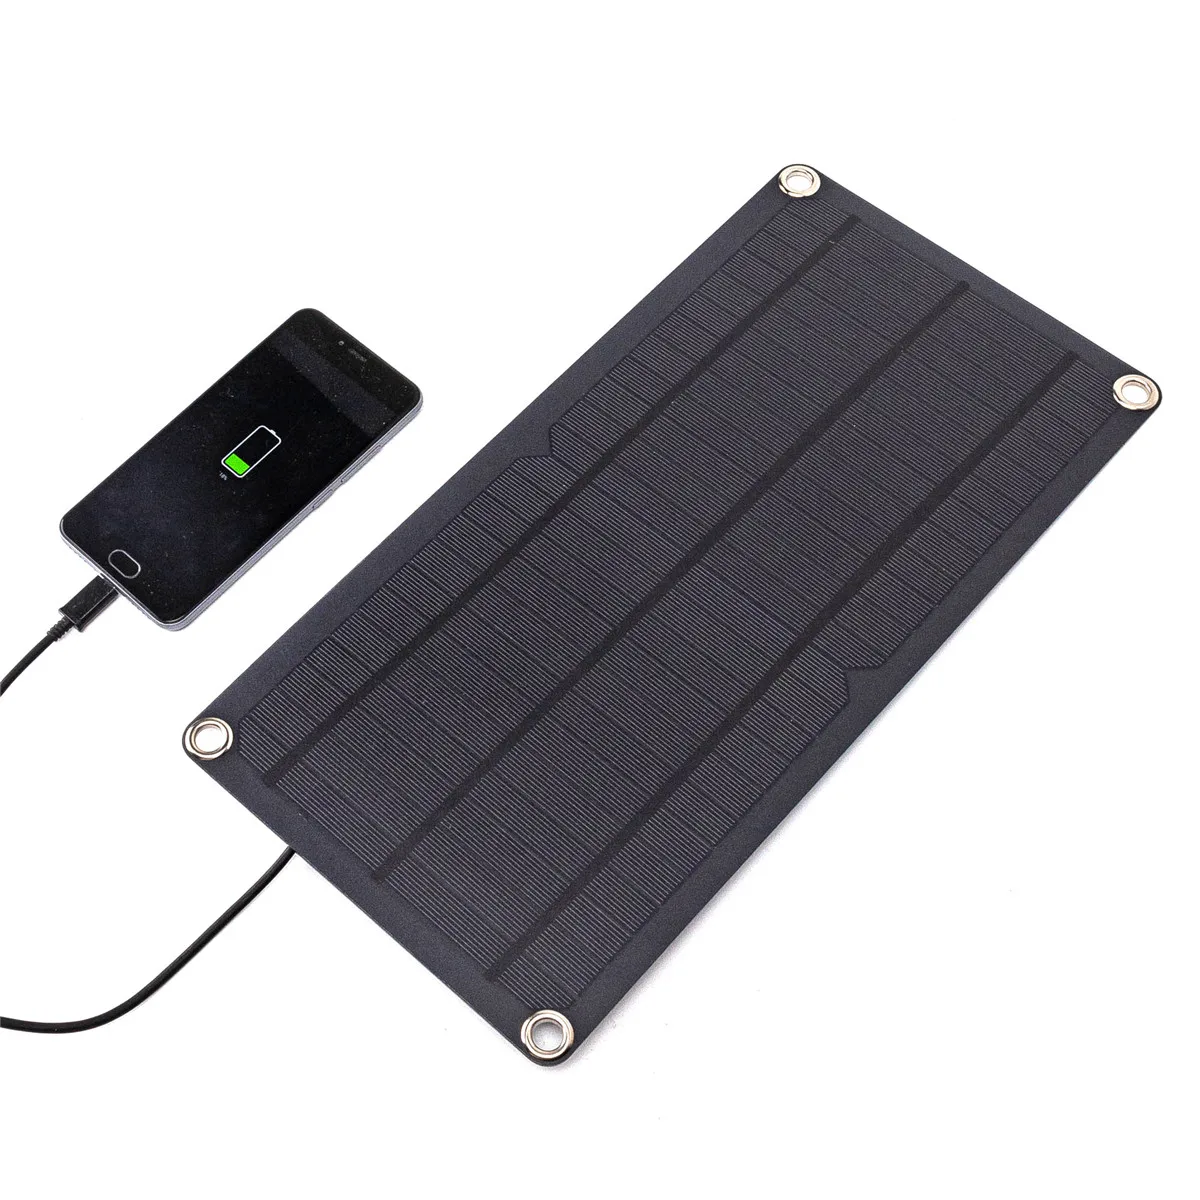 300w solar panel monocrystal double usb solar system kit complete power bank solar plate for car yacht rv battery charger free global shipping